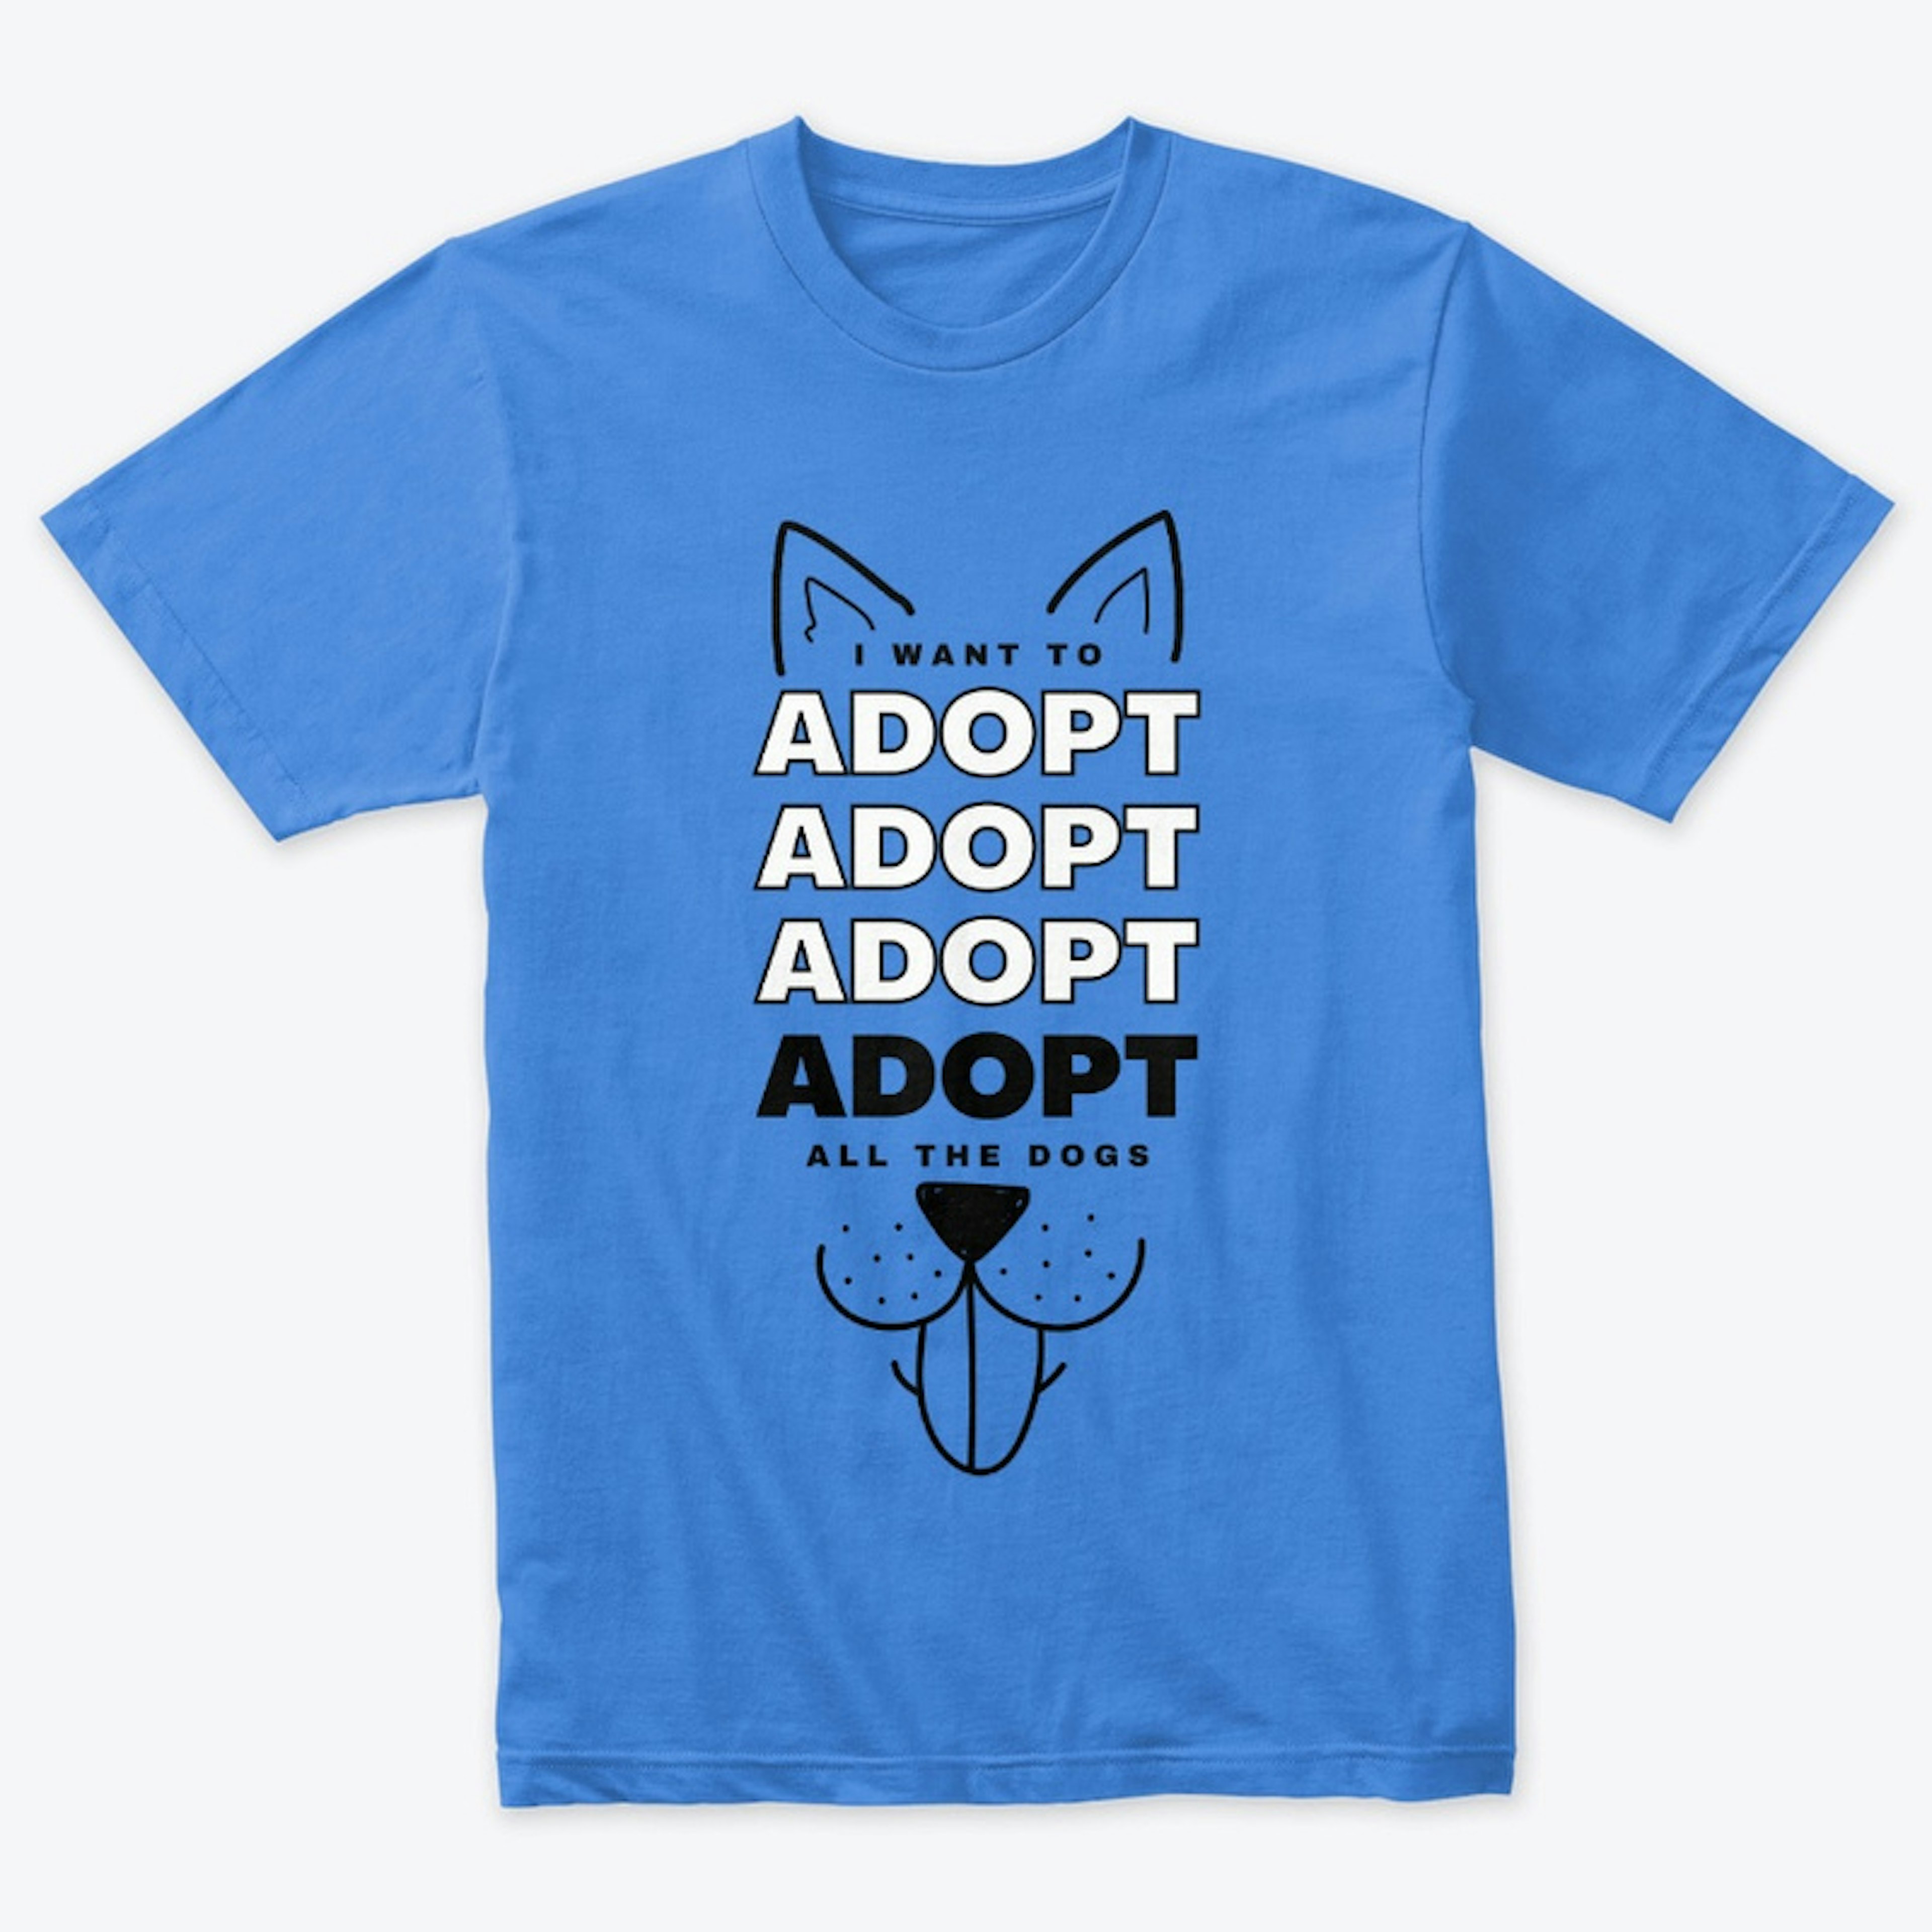 Adopt all the dogs!